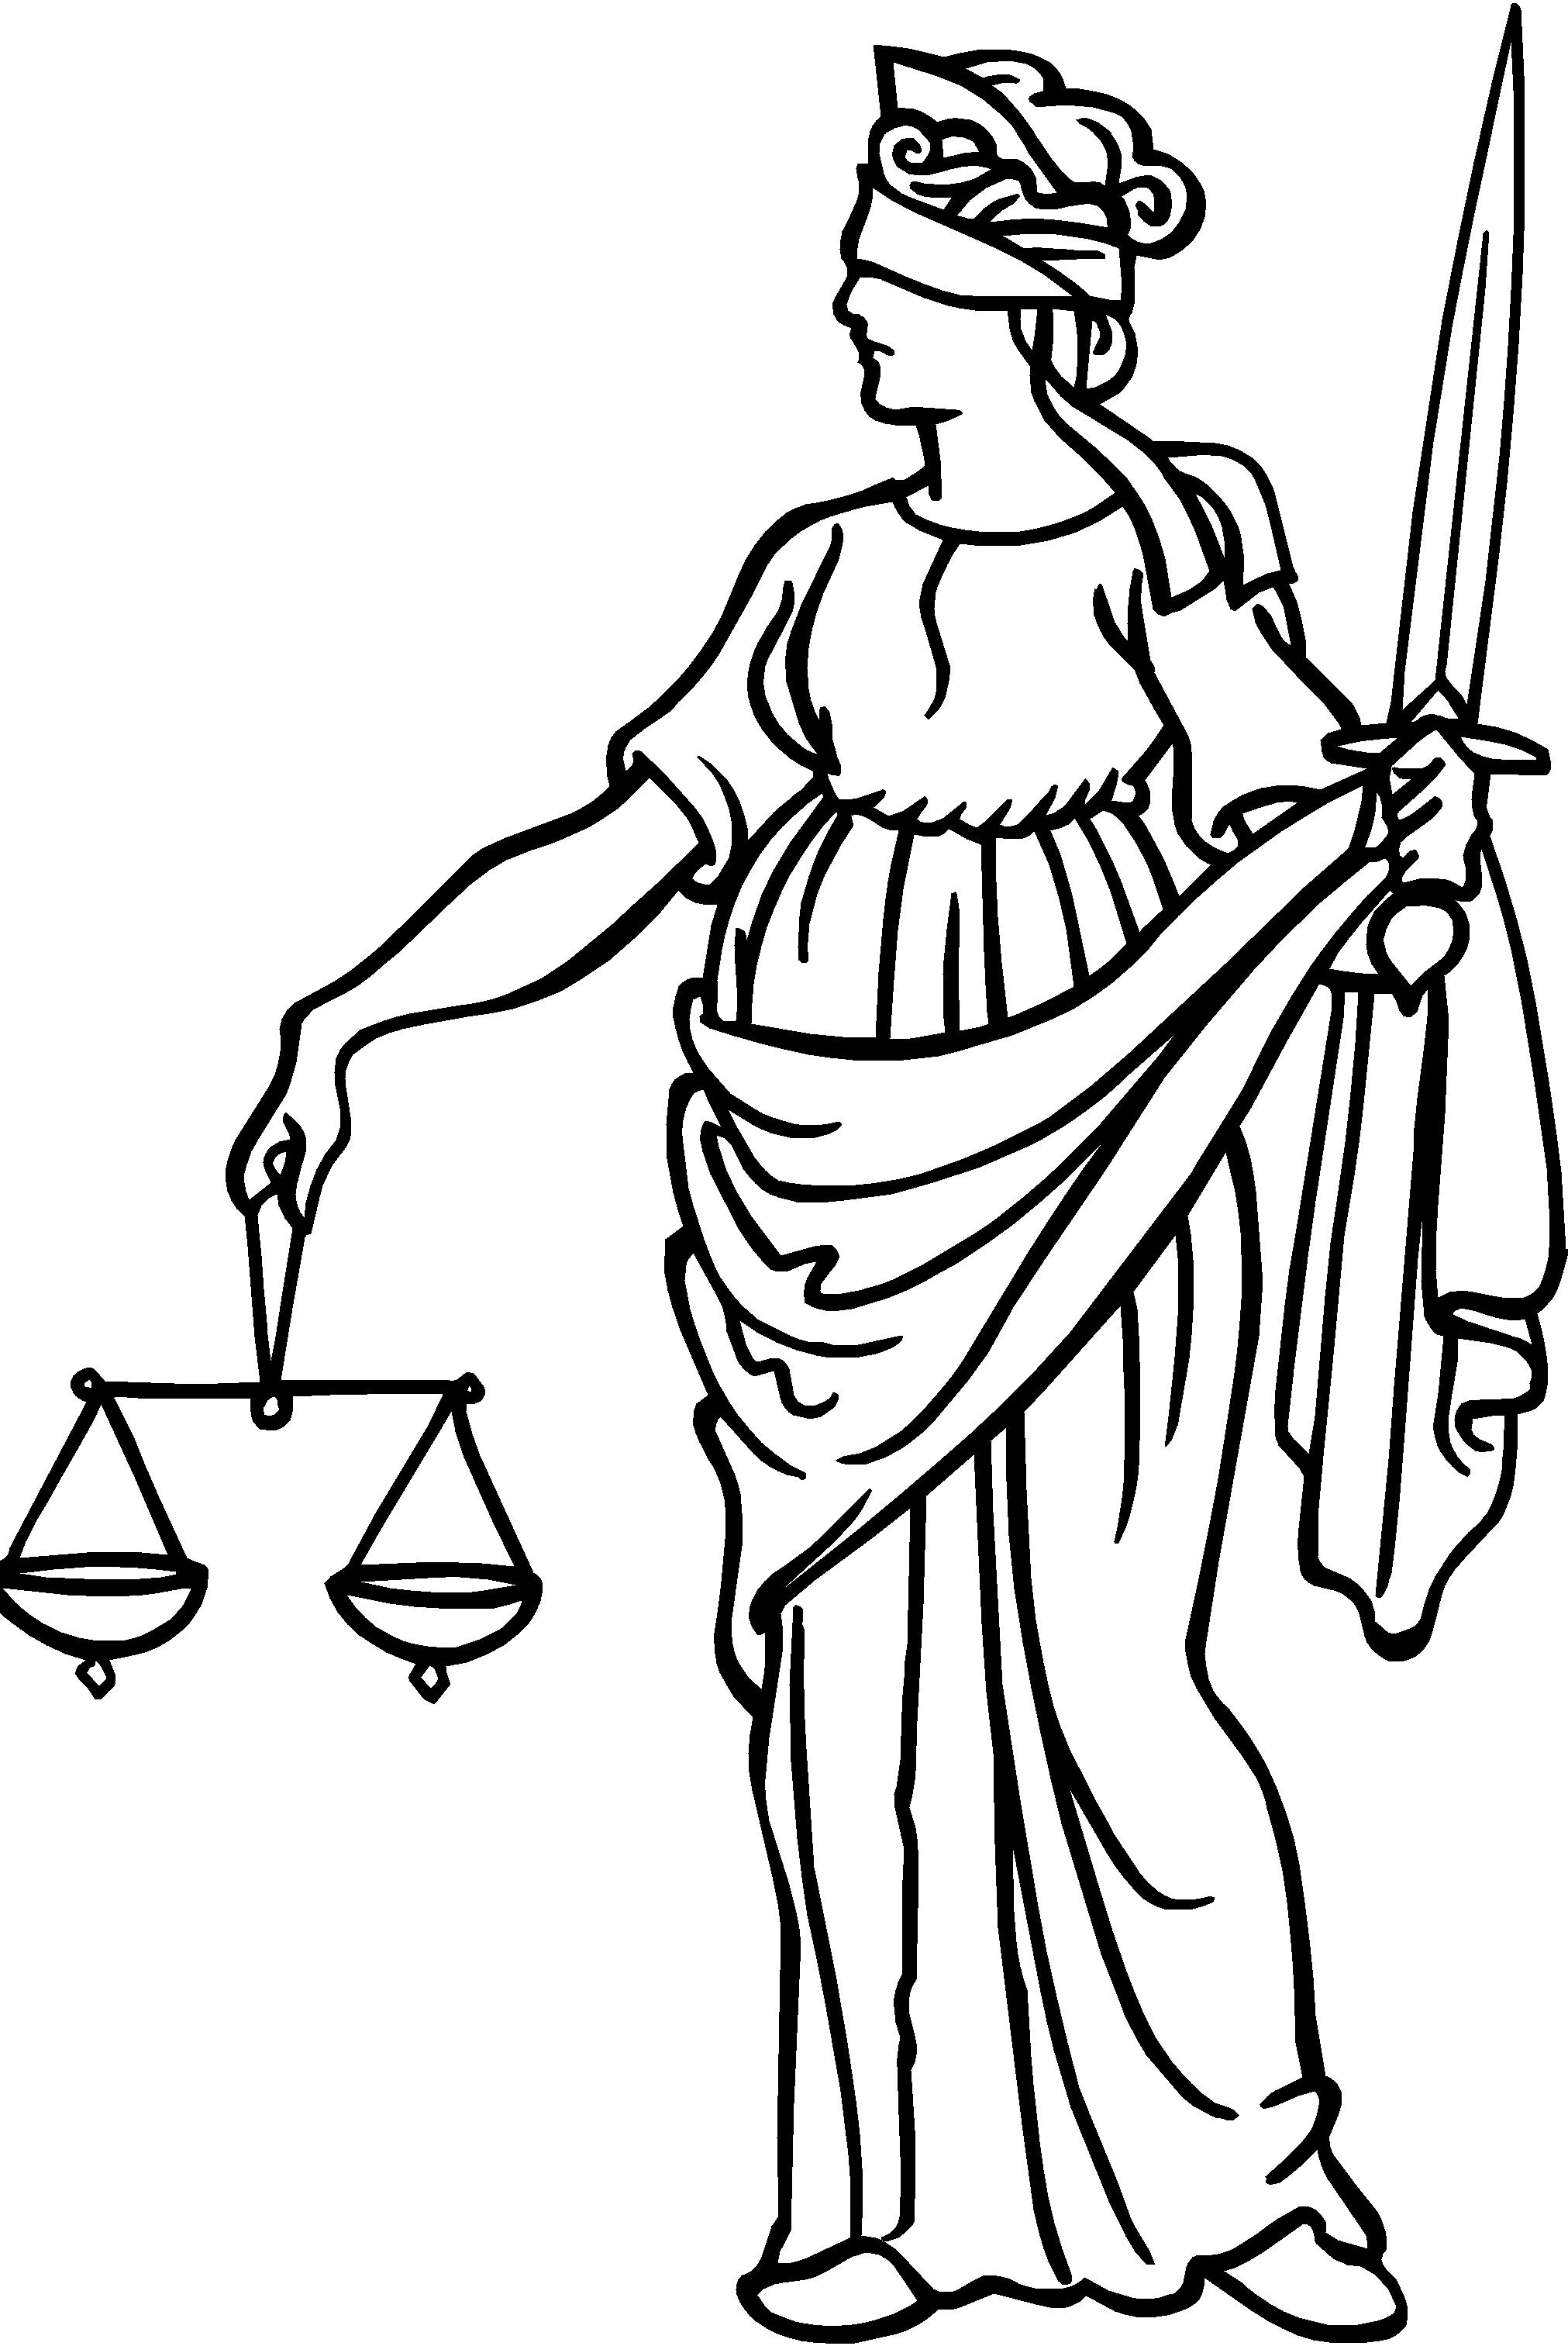 Images For > Scales Of Justice Logos